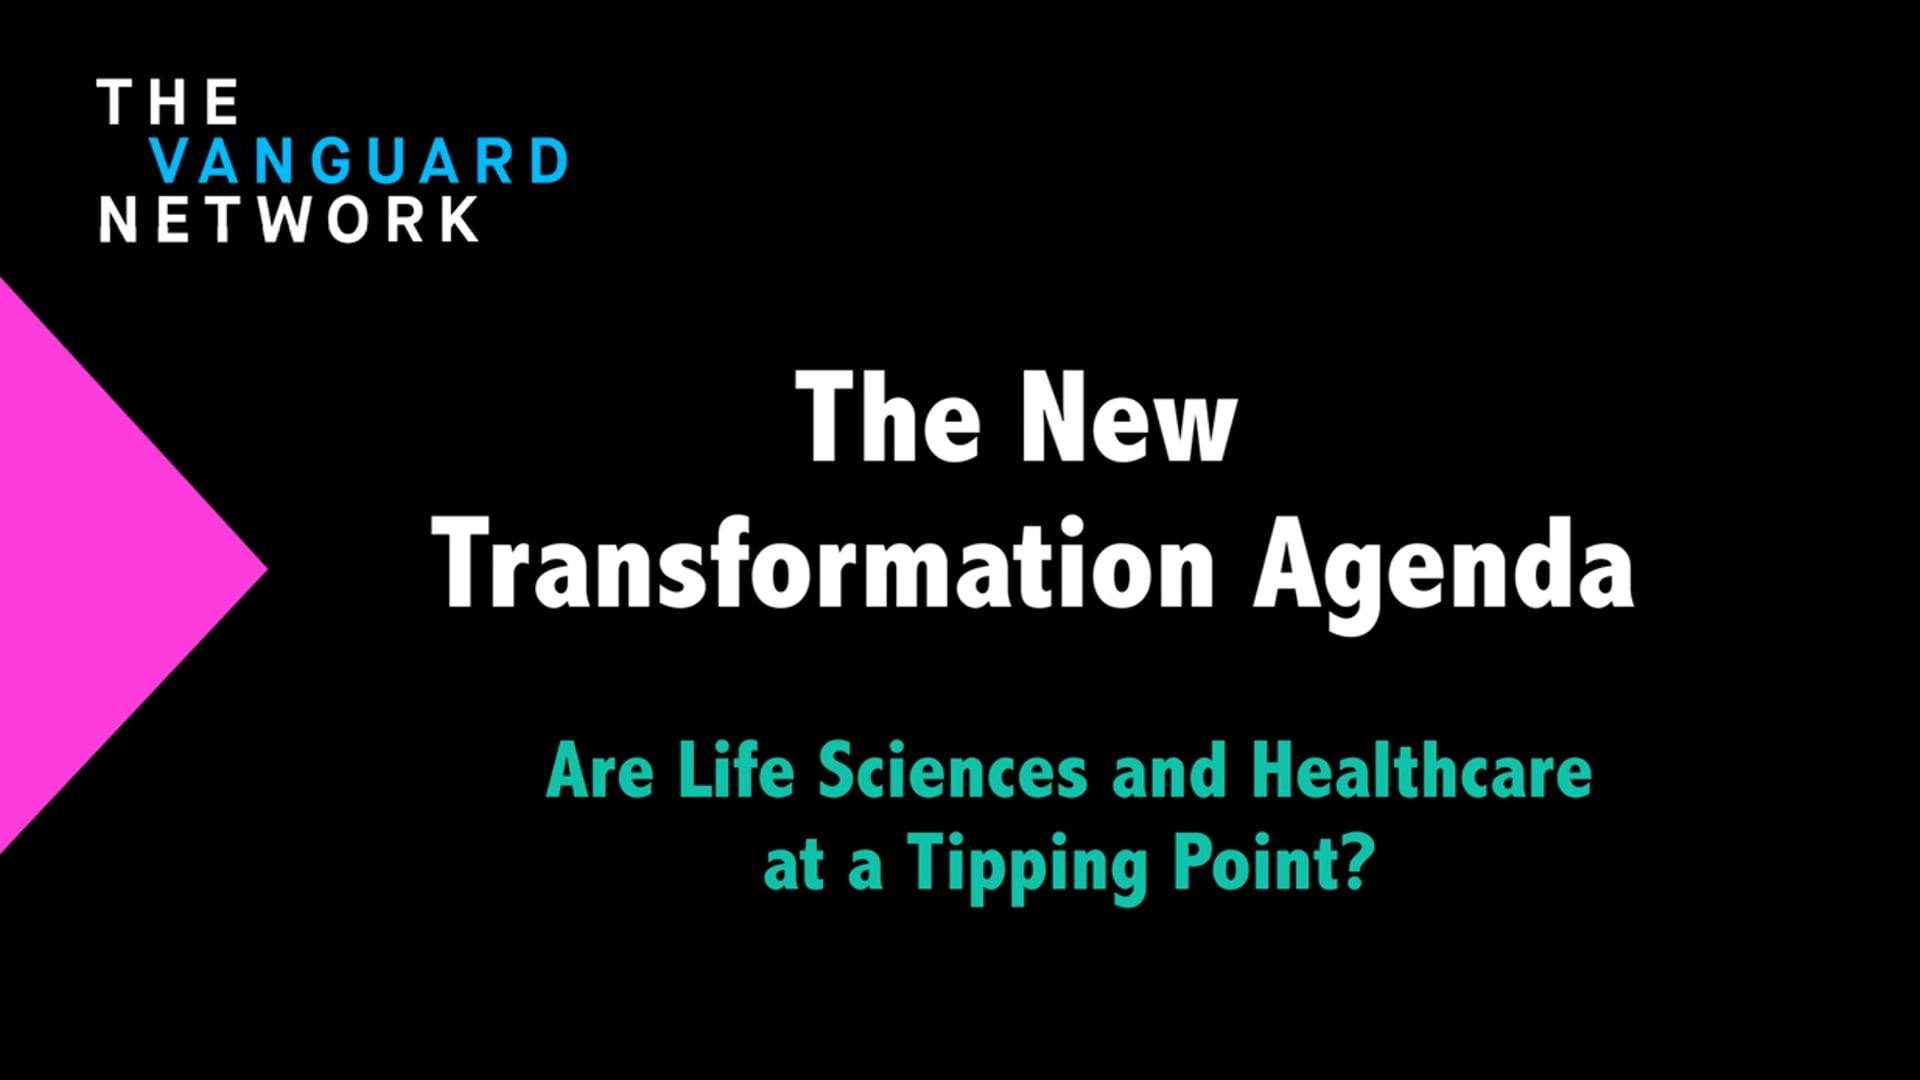 The New Transformation Agenda: Are Life Sciences and Healthcare at a Tipping Point?